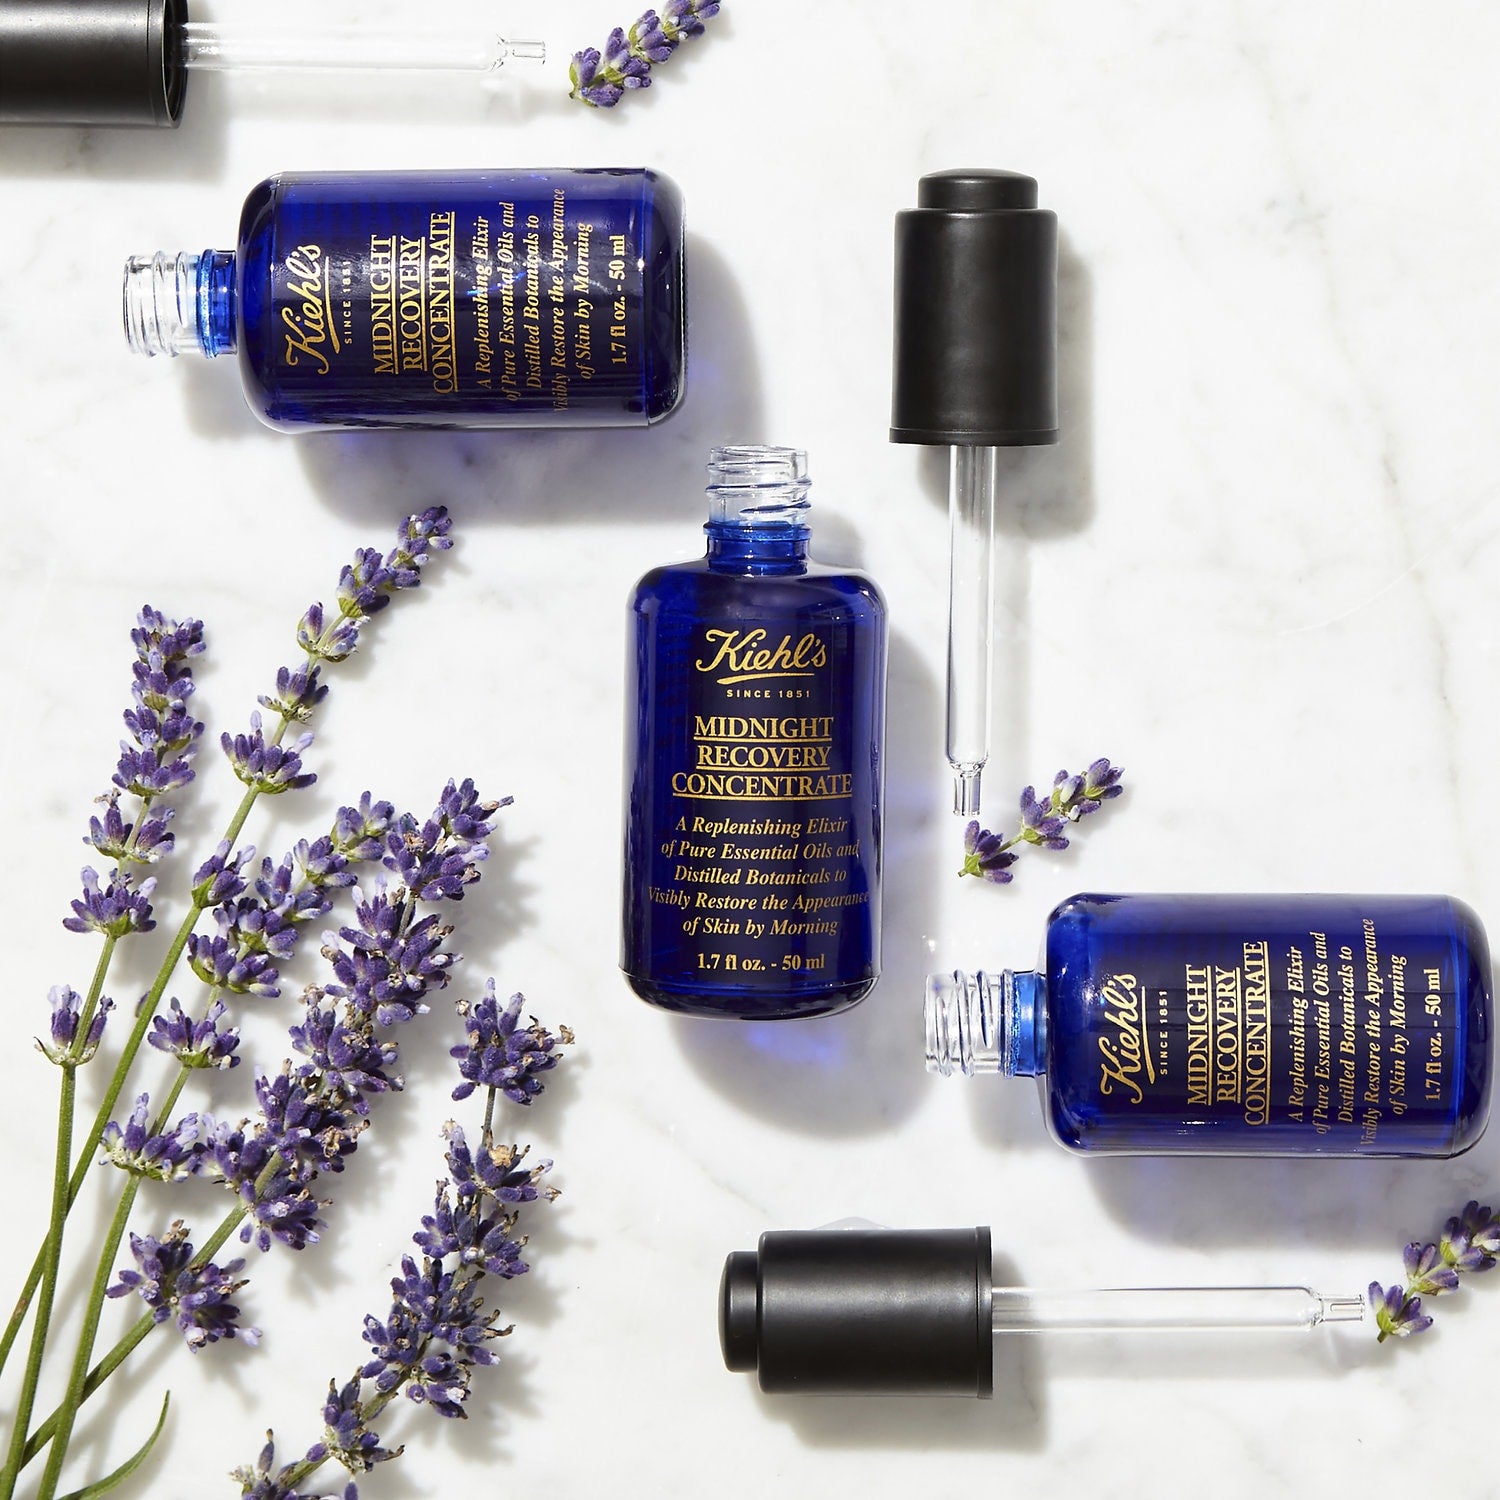 Kiehl's Midnight Recovery Concentrate (4754417156143)